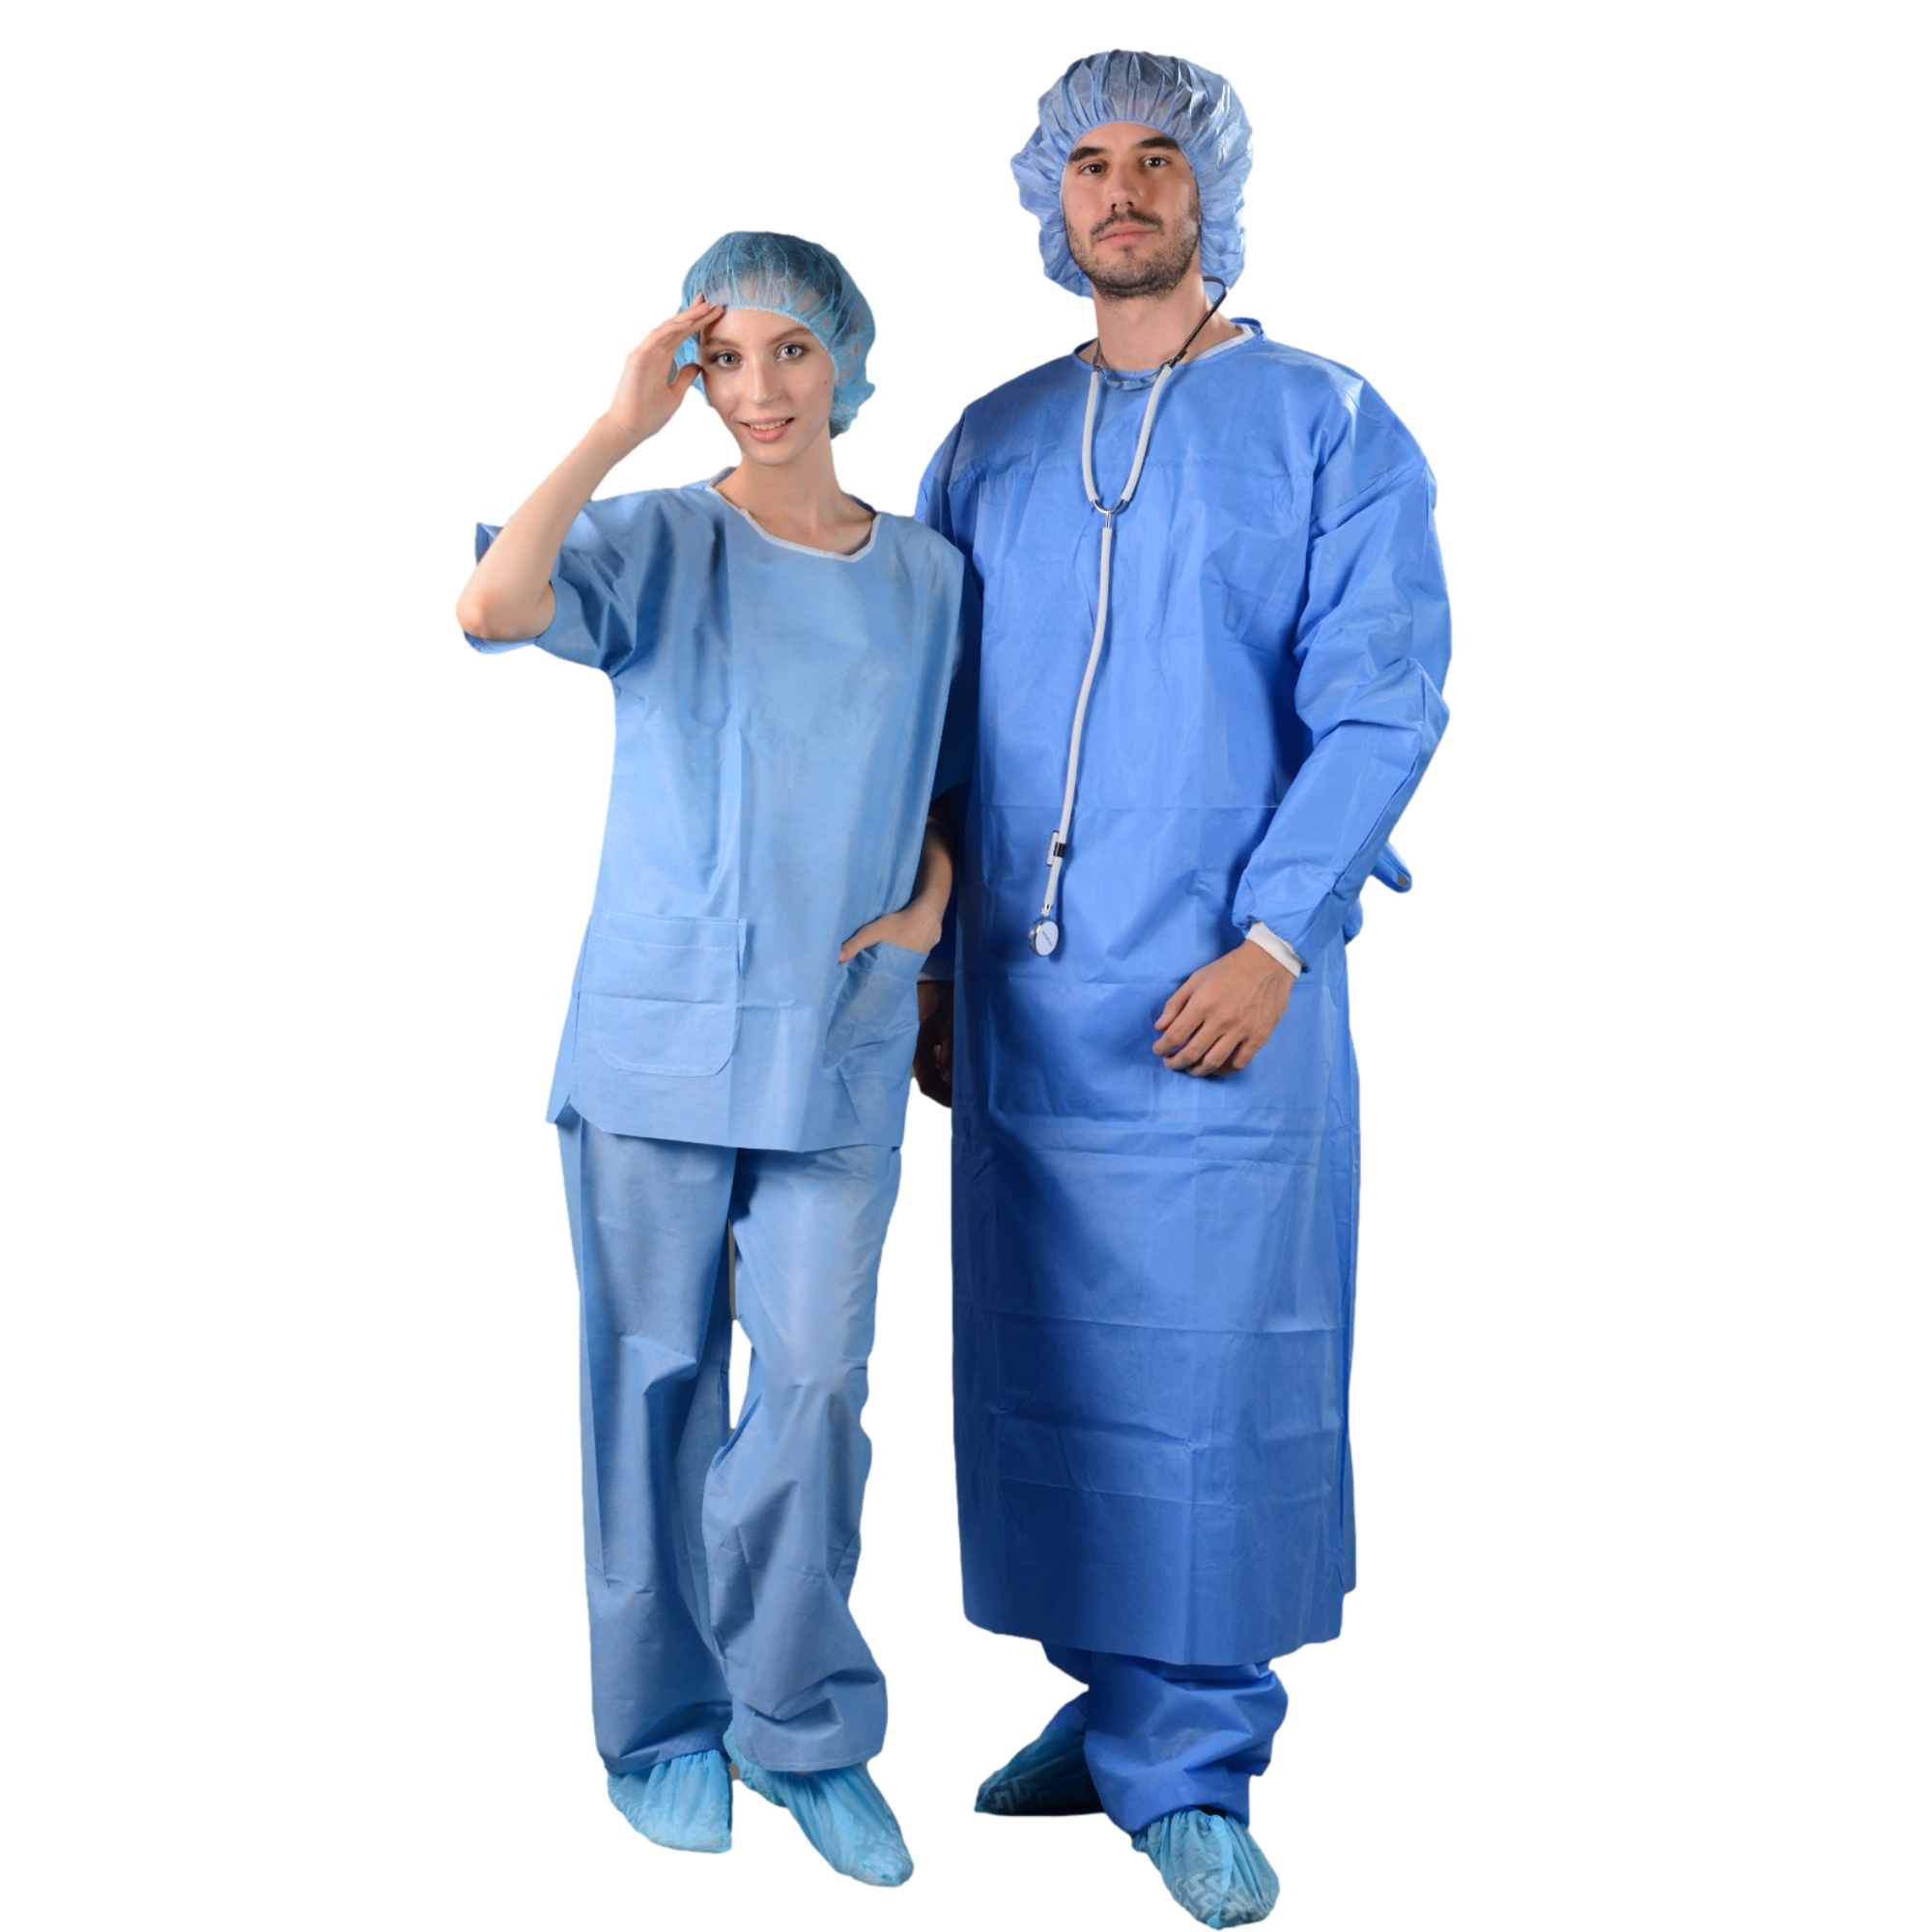 Revolutionary Biodegradable Surgical Gowns